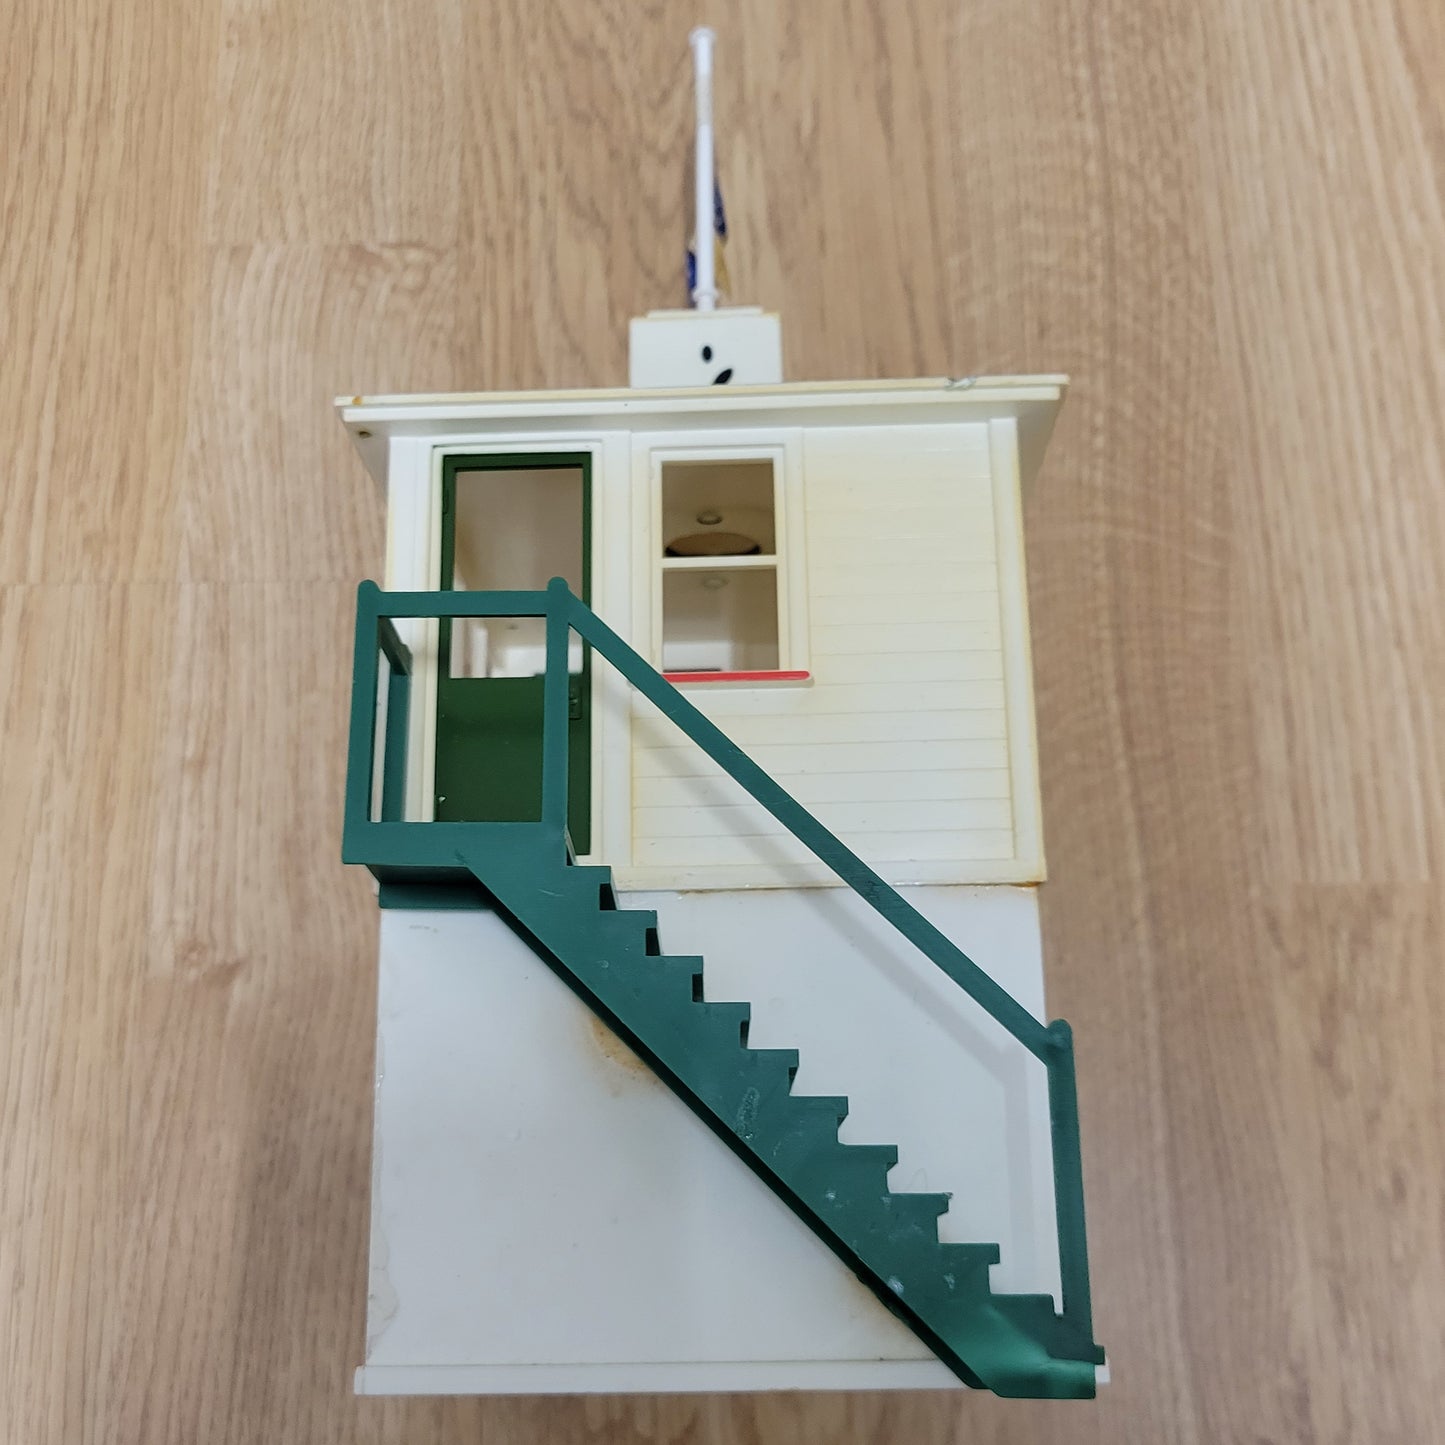 Scalextric 1:32 Building - C702 Control Tower